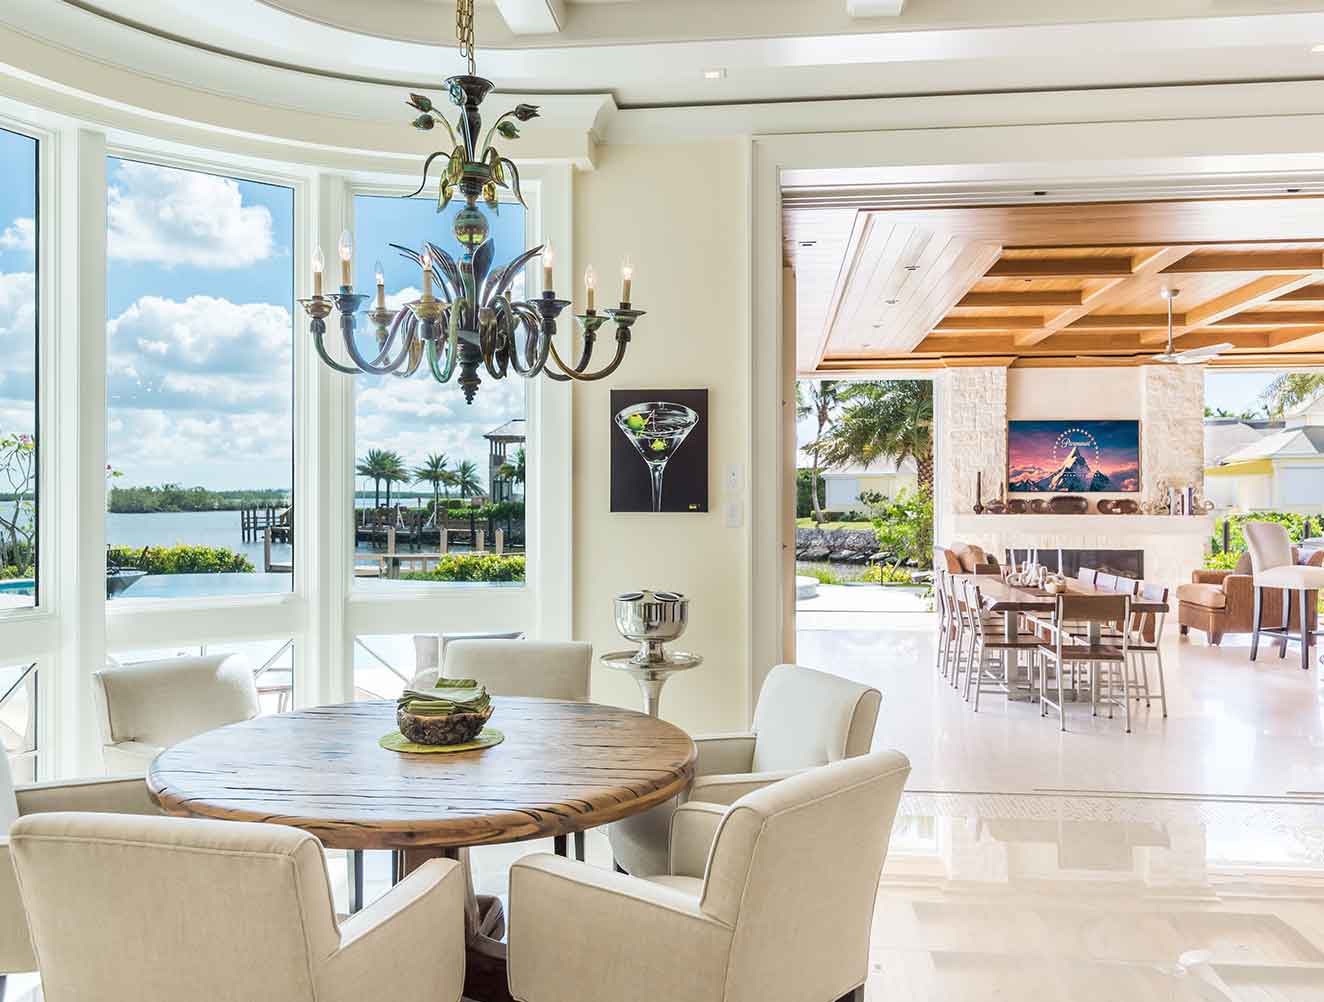 Kitchen & Dining Room at Nelson’s Walk Residence in Naples Florida, single family home designed by Kukk Architecture & Design Naples Architecture Firm